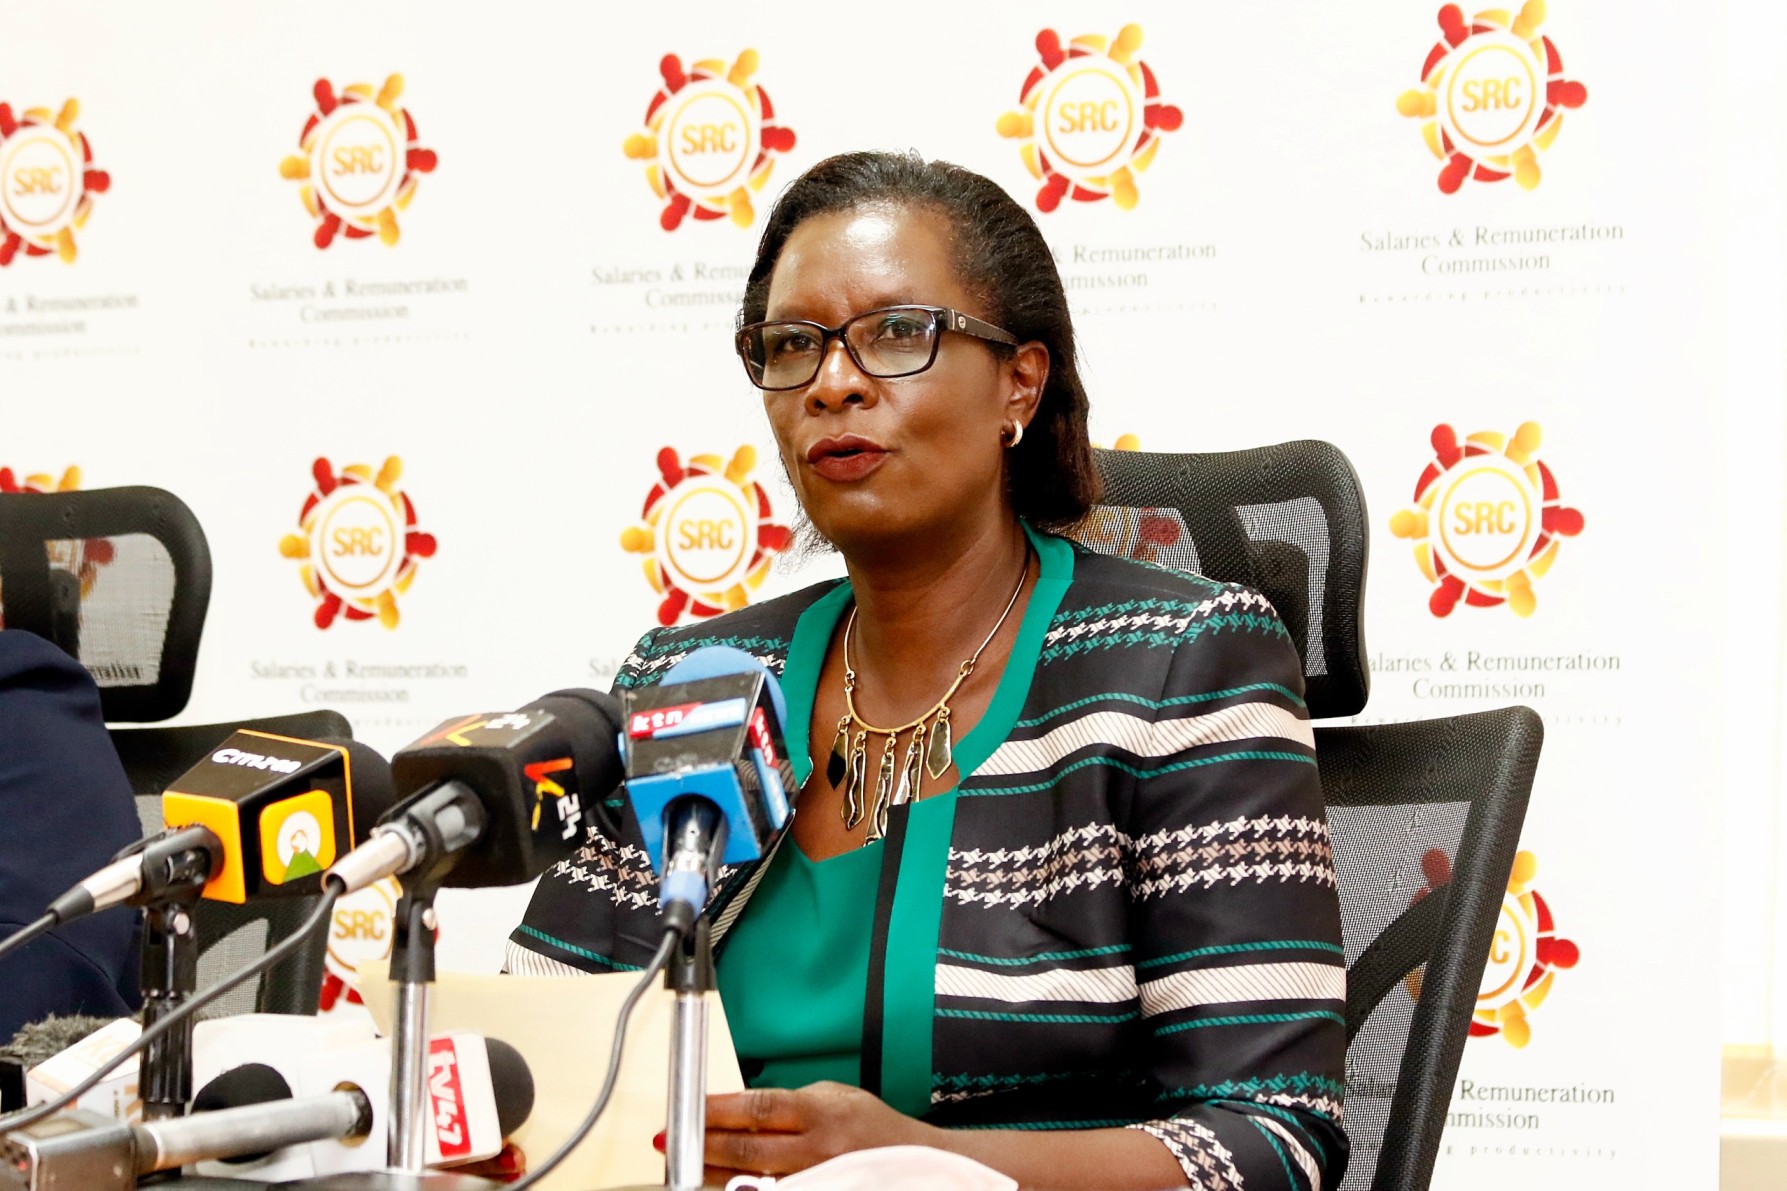 SRC announces salary increases for MPs and state officials, here are the changes